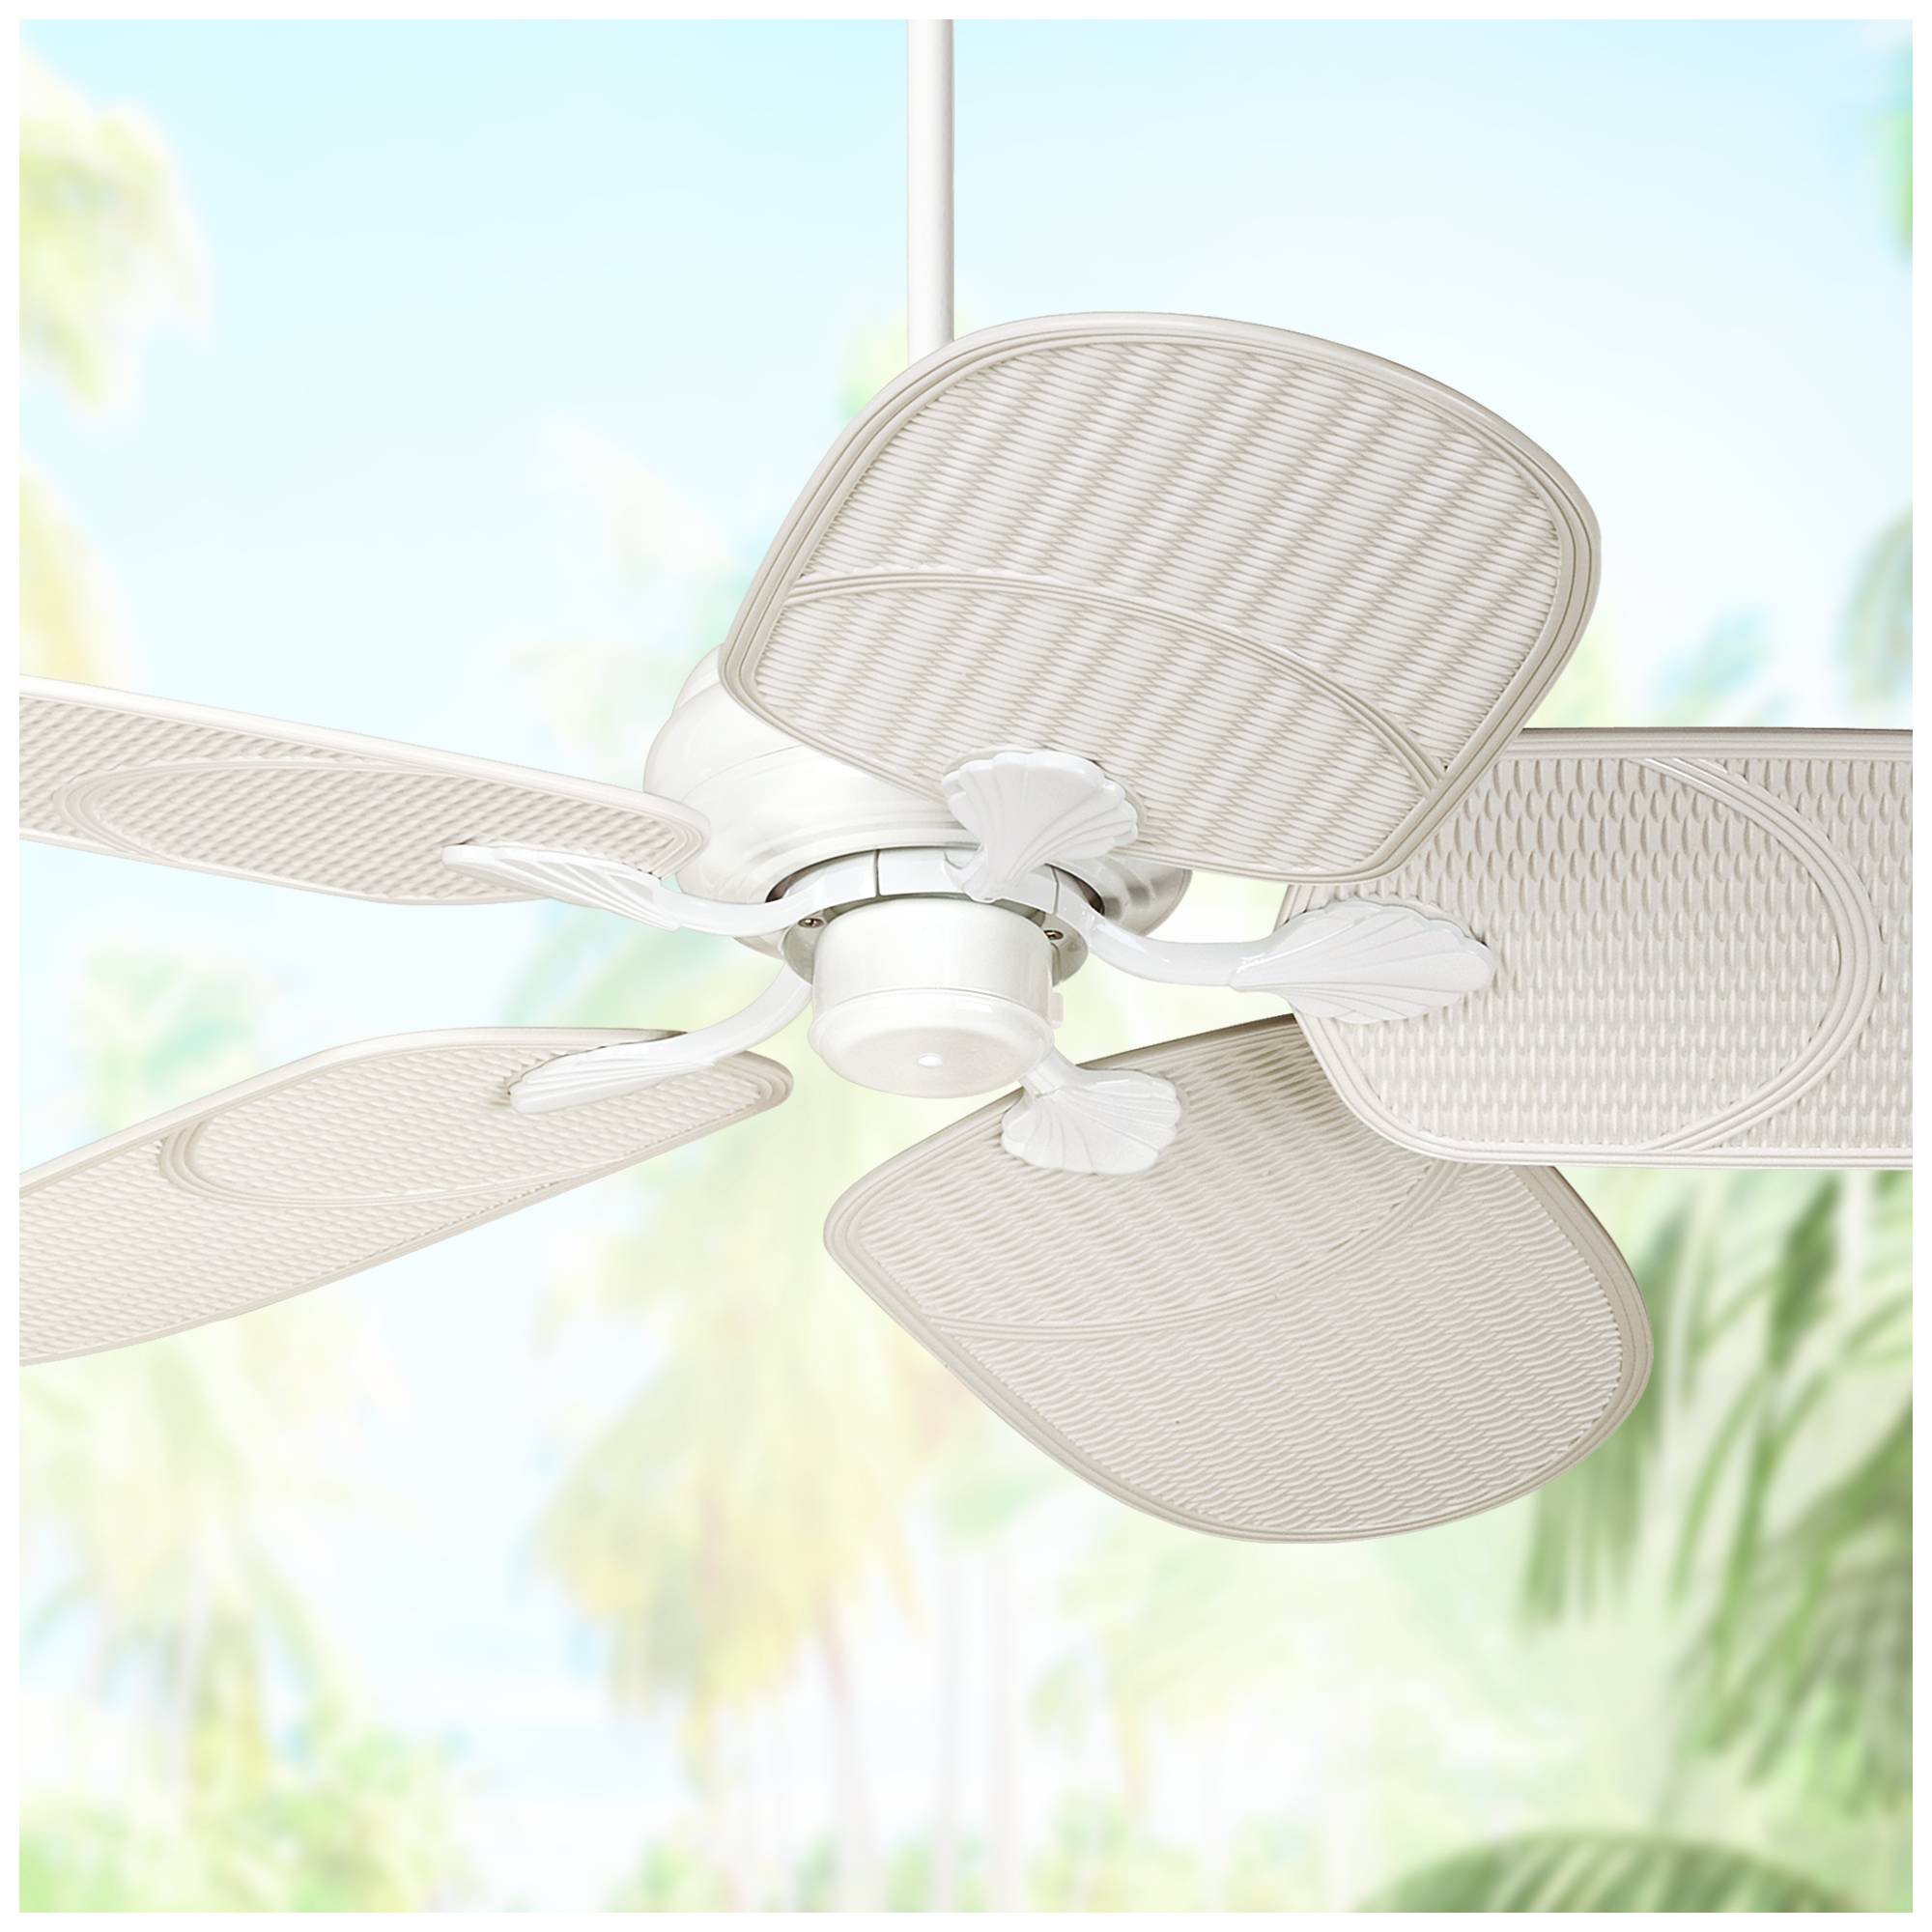 52 Tropical Outdoor Ceiling Fan White Palm Leaf Blades Wet Rated